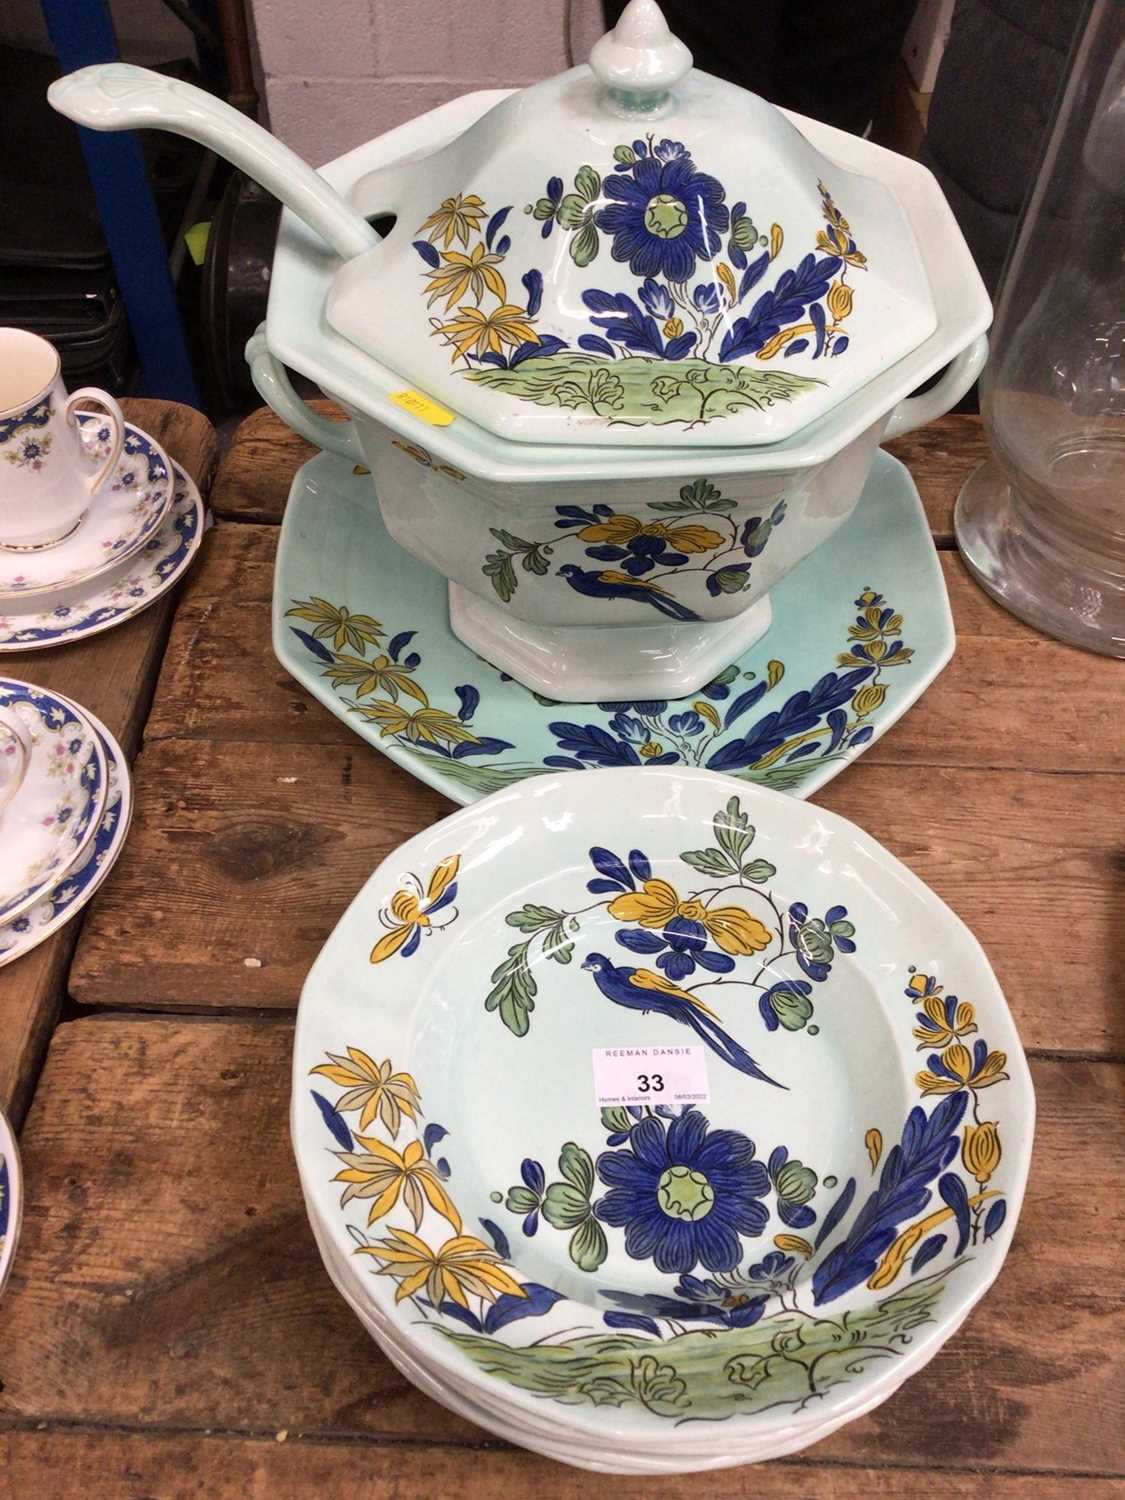 Lot 33 - Adams calyx ware 'Blue Parrot' pattern lidded soup tureen on stand with ladle and six matching soup bowls